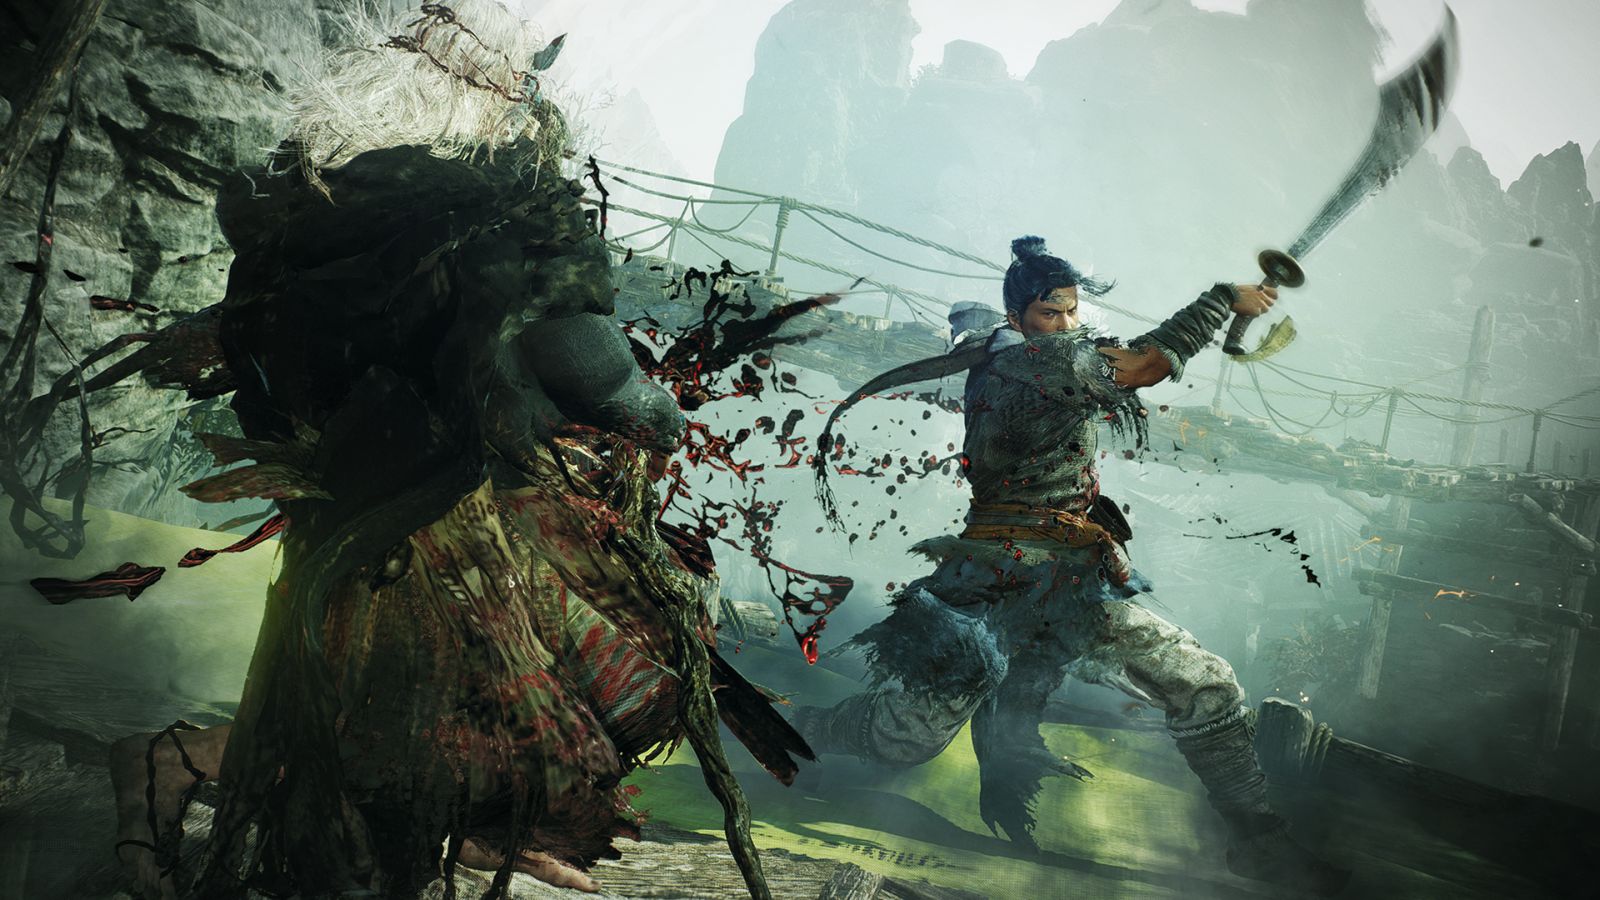 Will Ghost of Tsushima come to Steam?